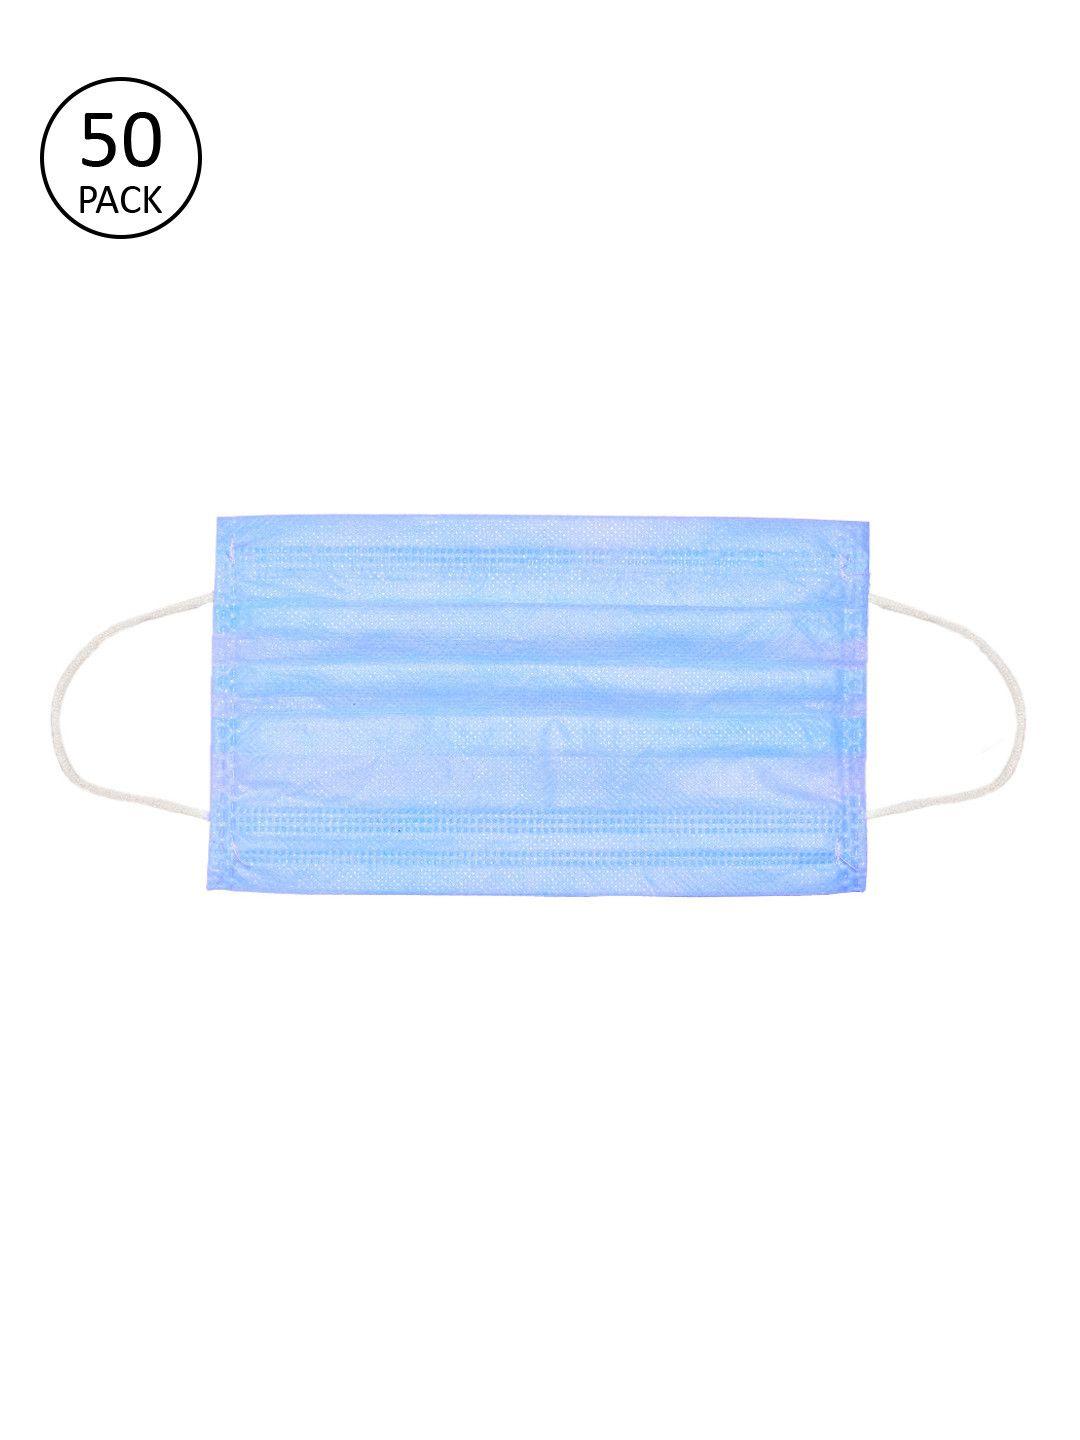 hubberholme unisex pack of 50 3-ply surgical masks